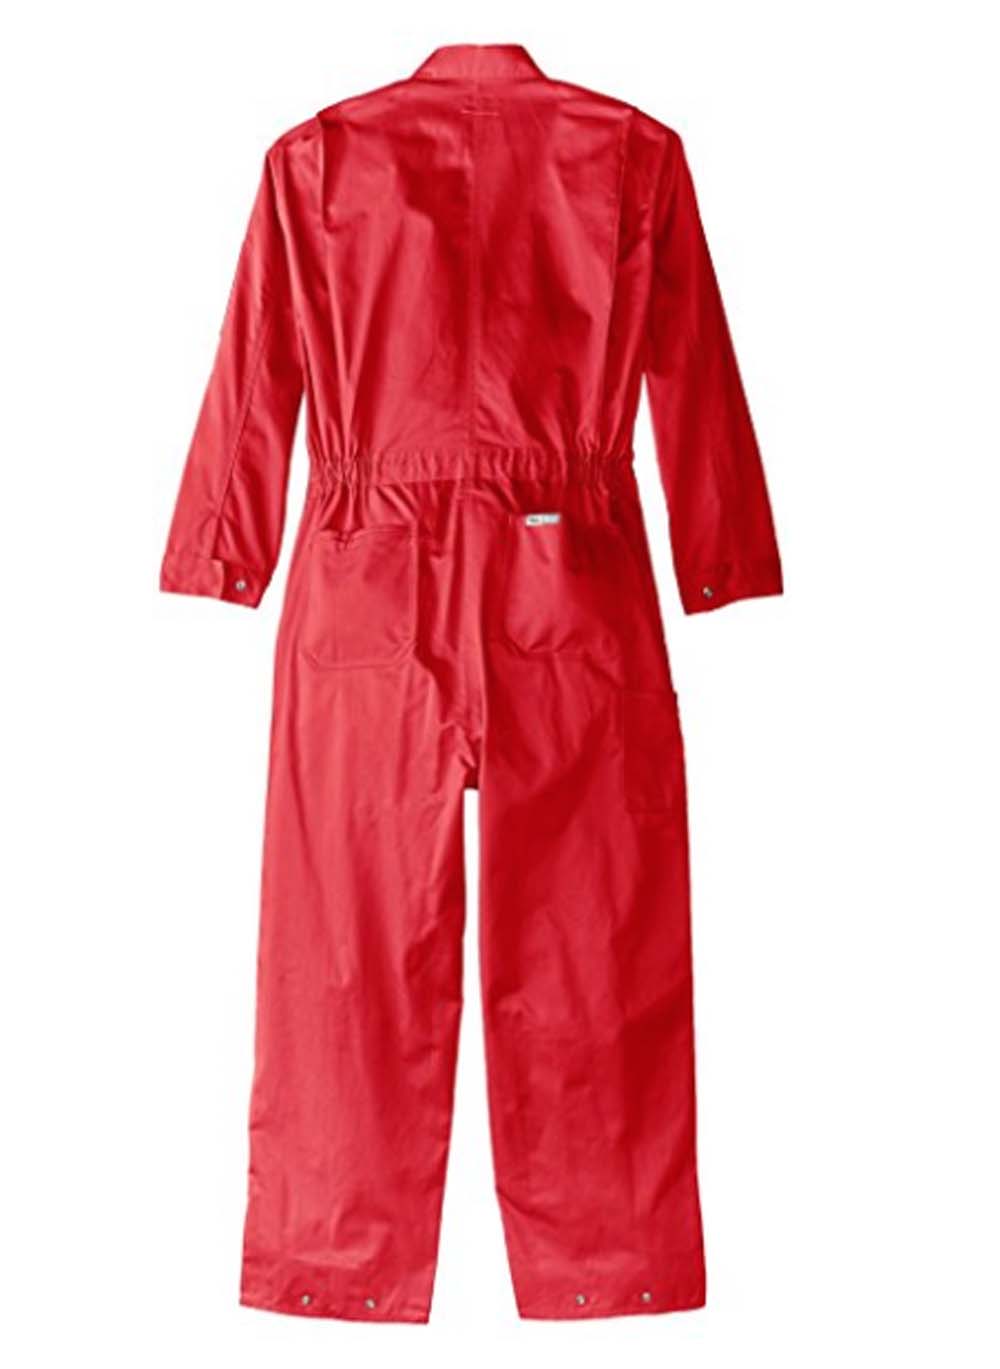 Walls Mens Safety Red 50 Regular Long Sleeve Twill Coverall - image 2 of 2